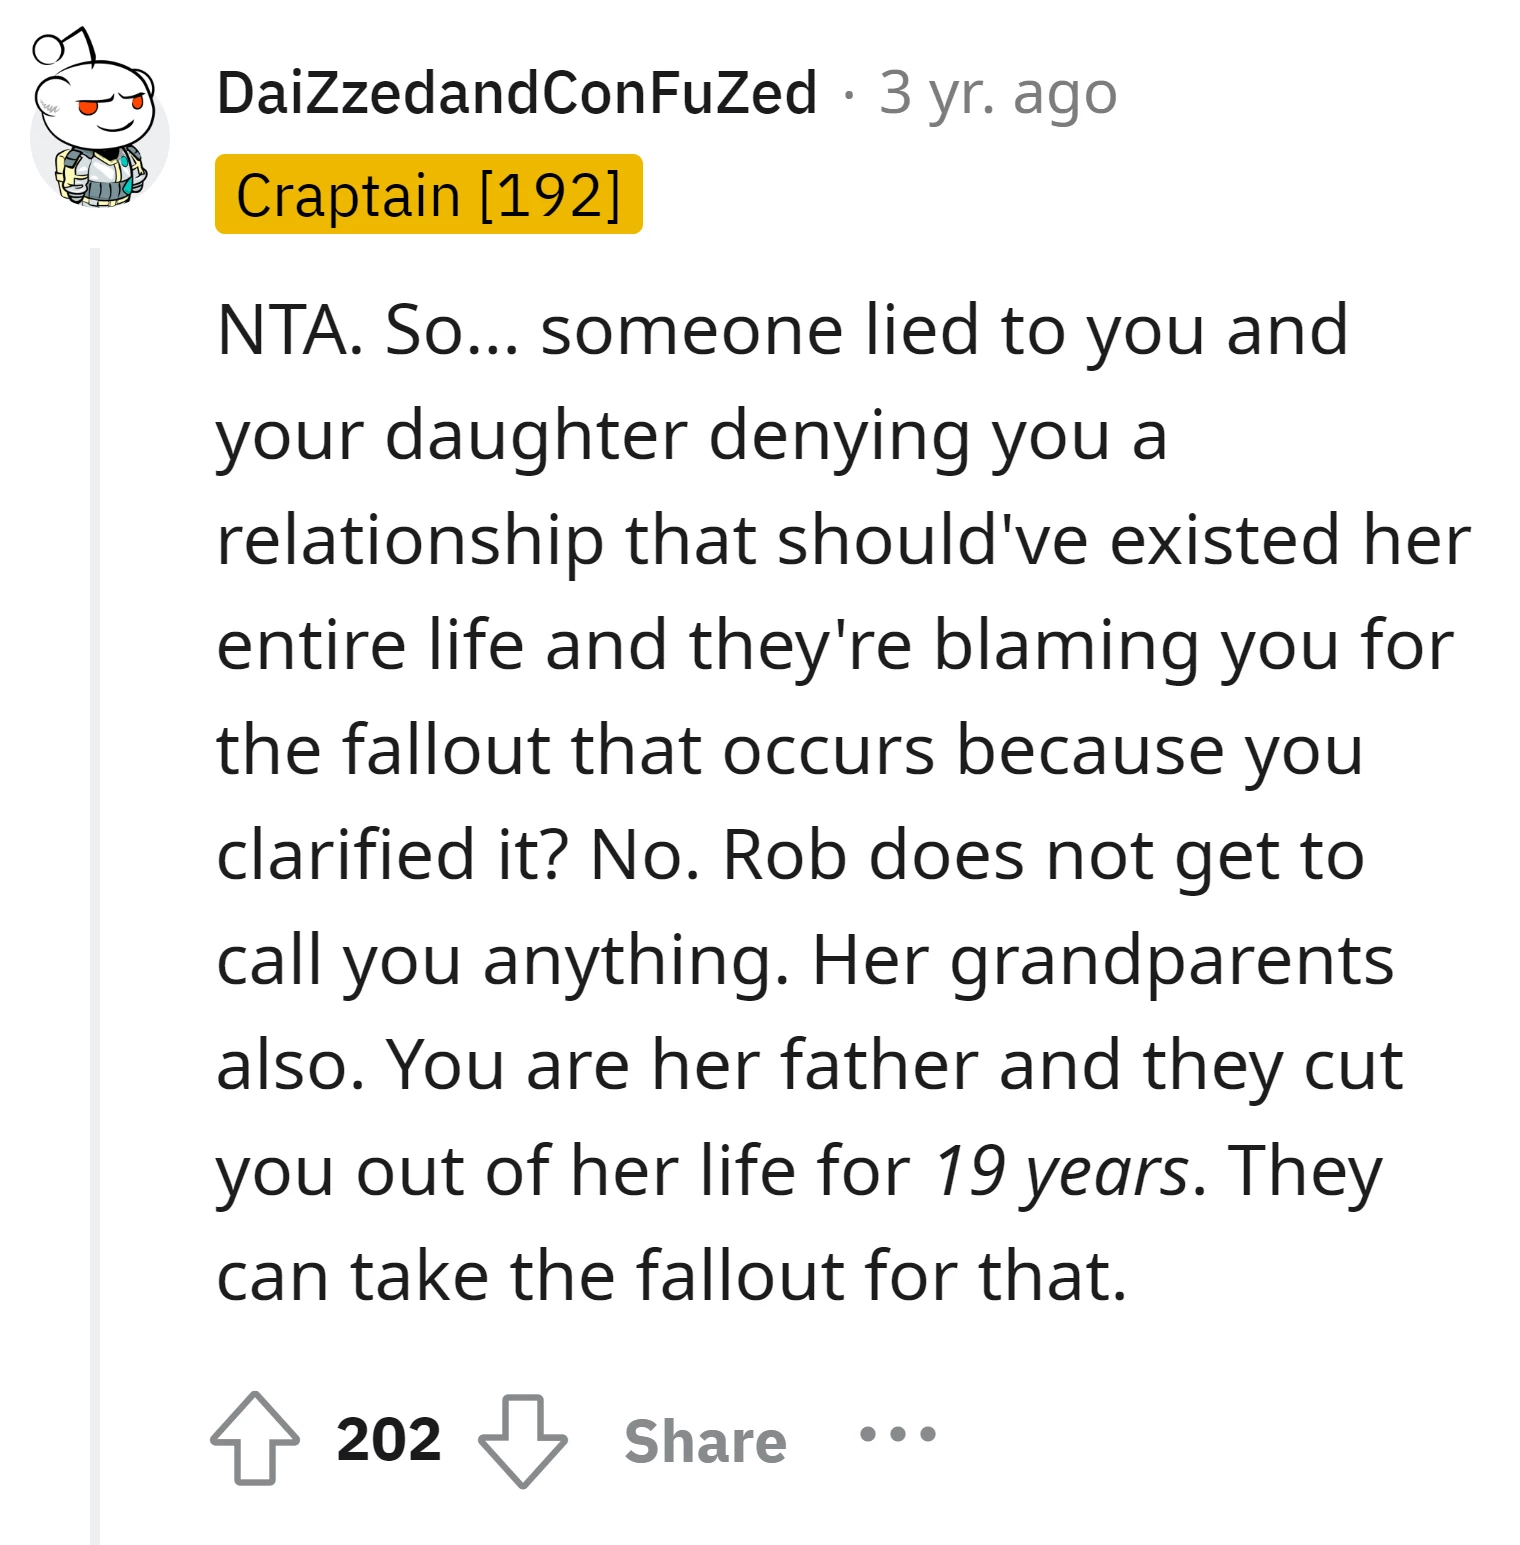 The uncle and grandparents were the ones who lied and denied him a relationship with his daughter for 19 years